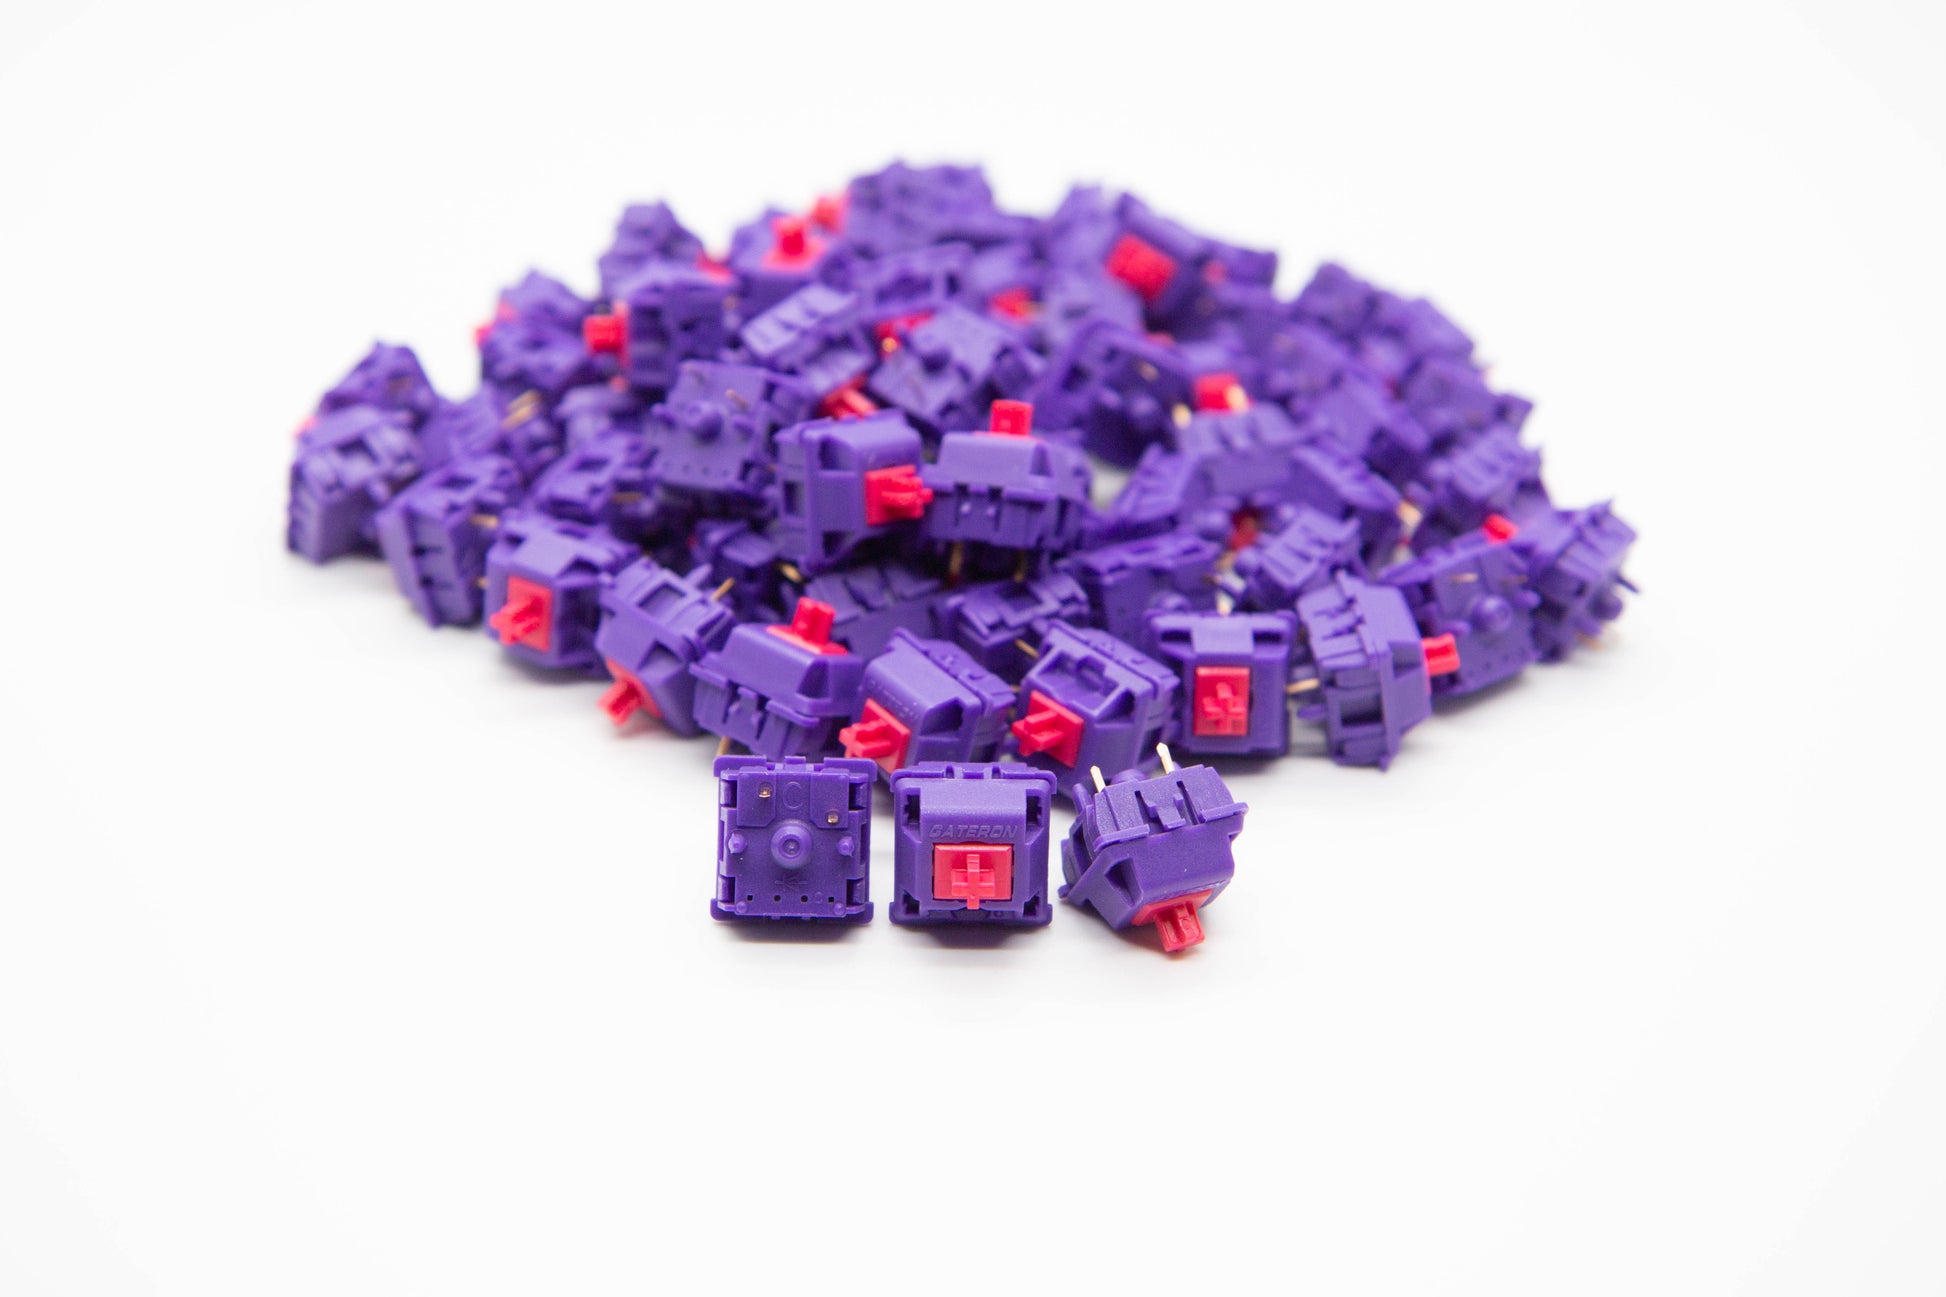 Close-up shot of a pile of KBDFans x MITO x Gateron Laser - 70g mechanical keyboard switches featuring purple housing and red stems